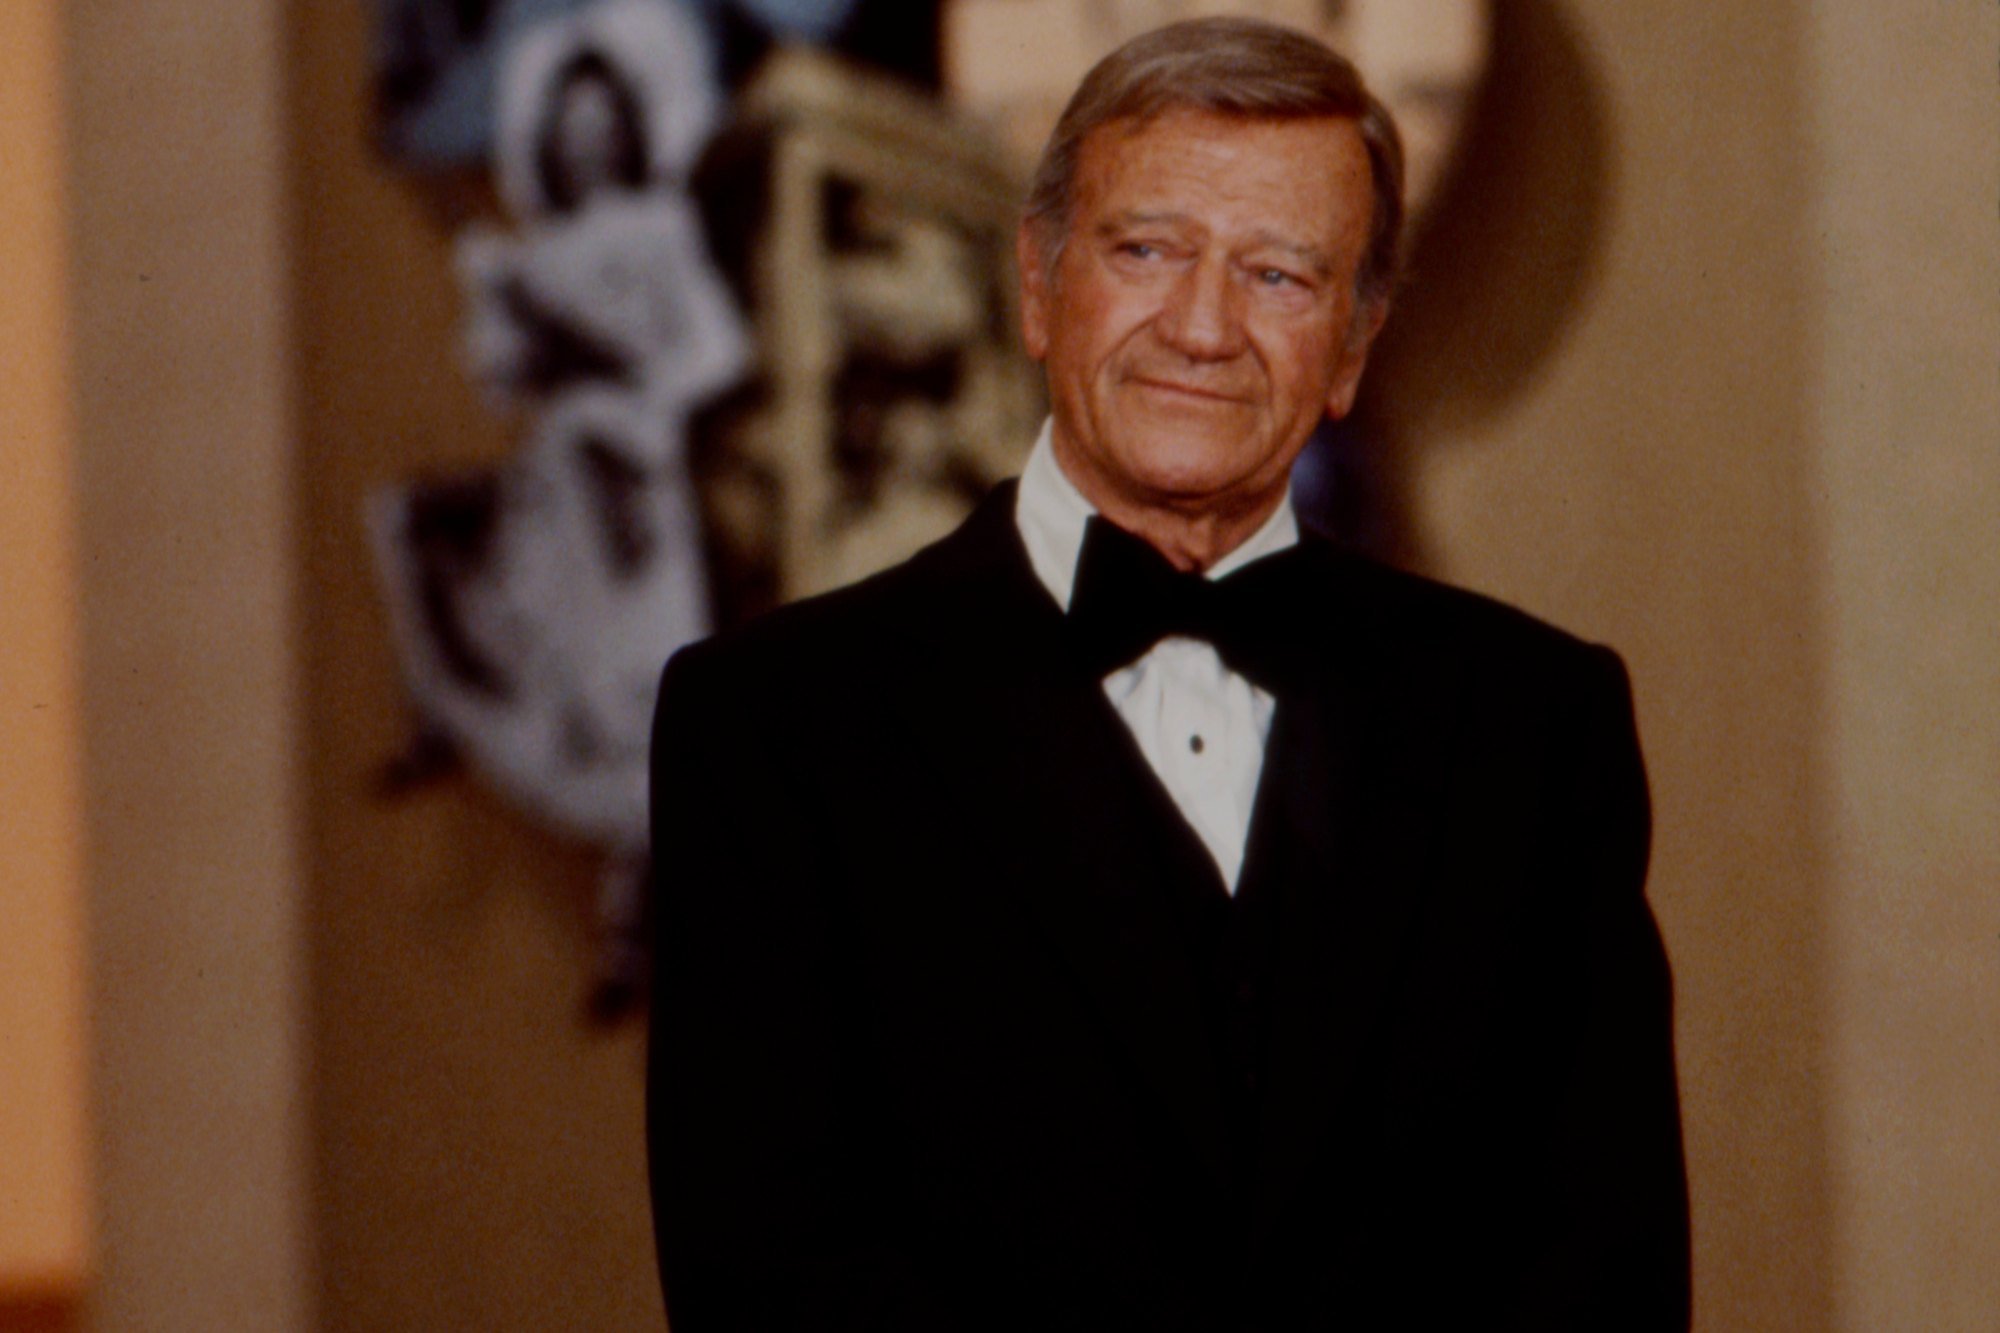 John Wayne, who died from cancer. He's wearing a tux, looking to the side.